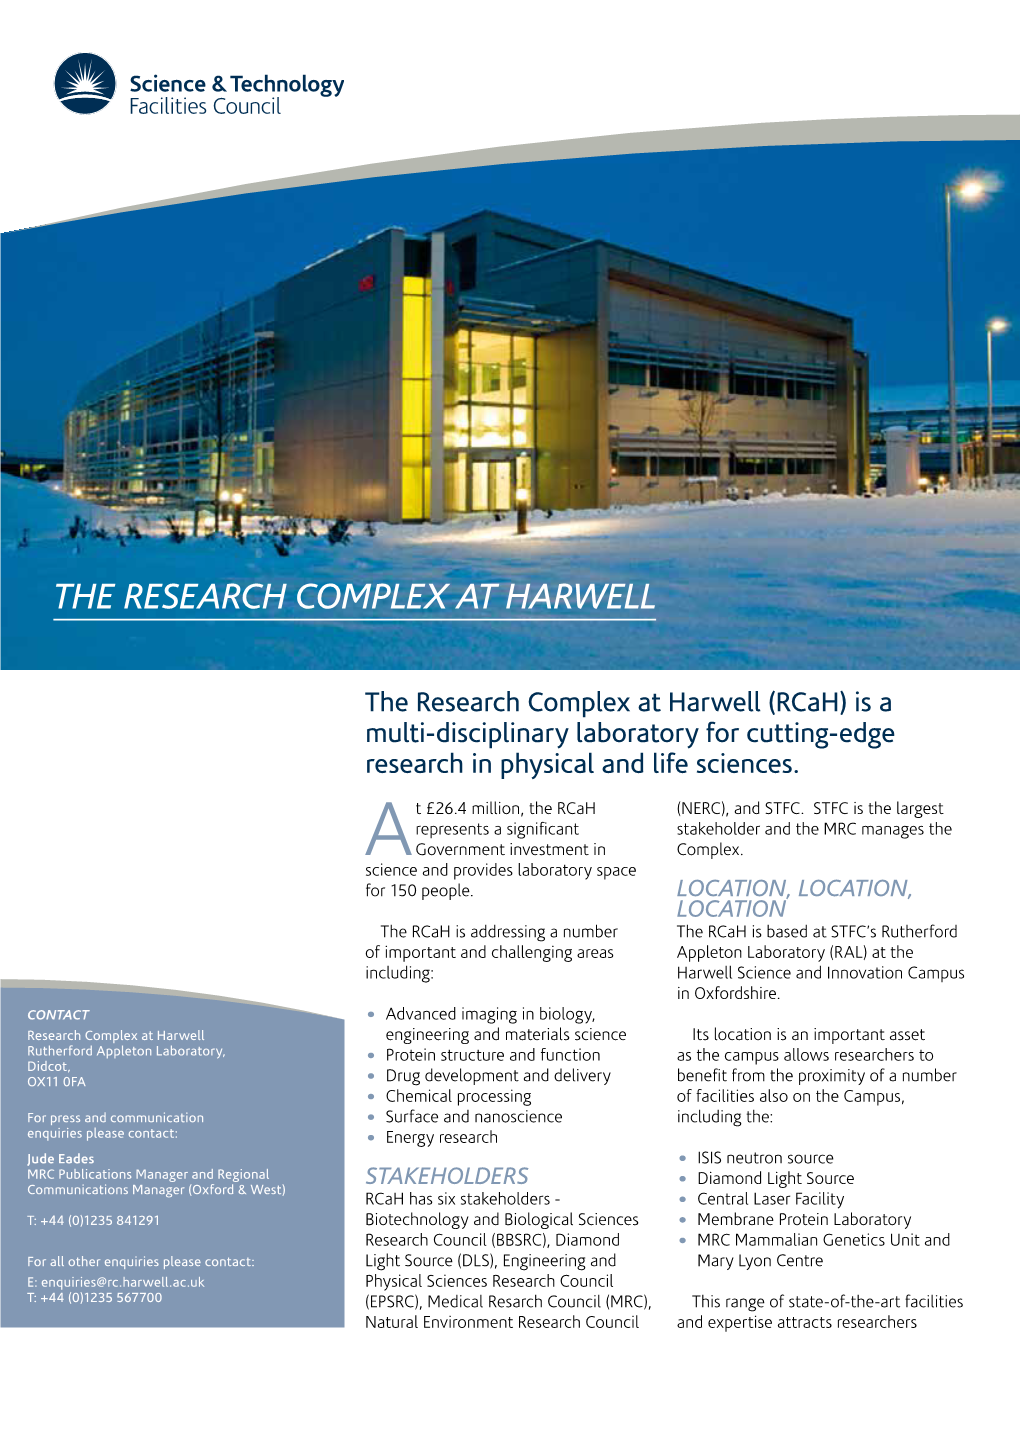 The Research Complex at Harwell (Rcah) Is a Multi-Disciplinary Laboratory for Cutting-Edge Research in Physical and Life Sciences